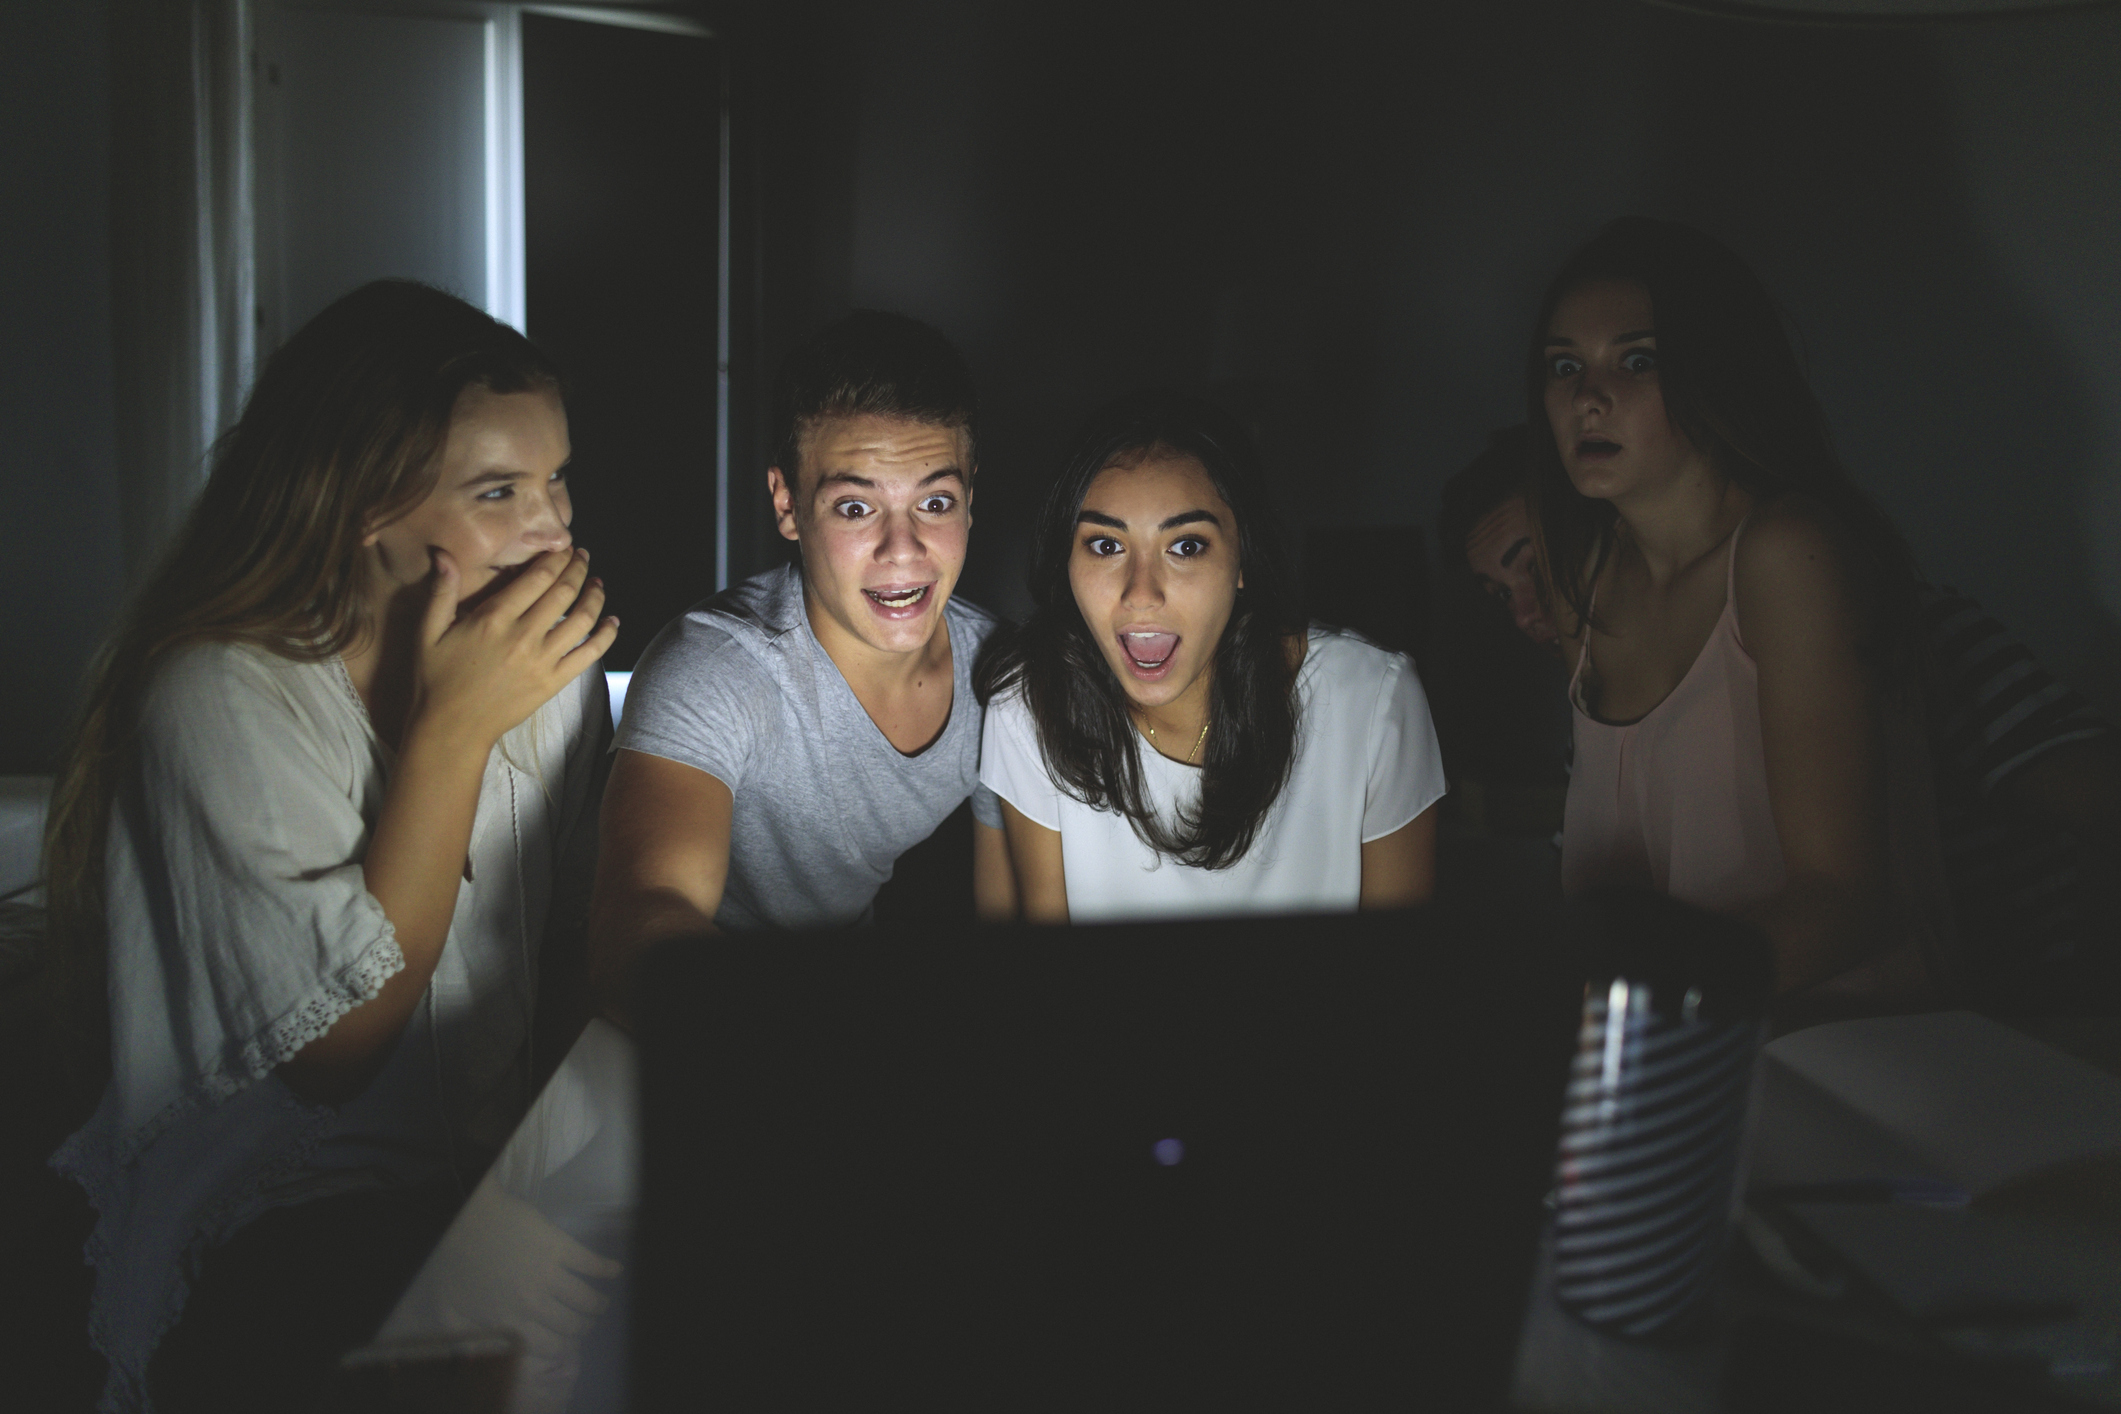 College students watching scary movie on laptop